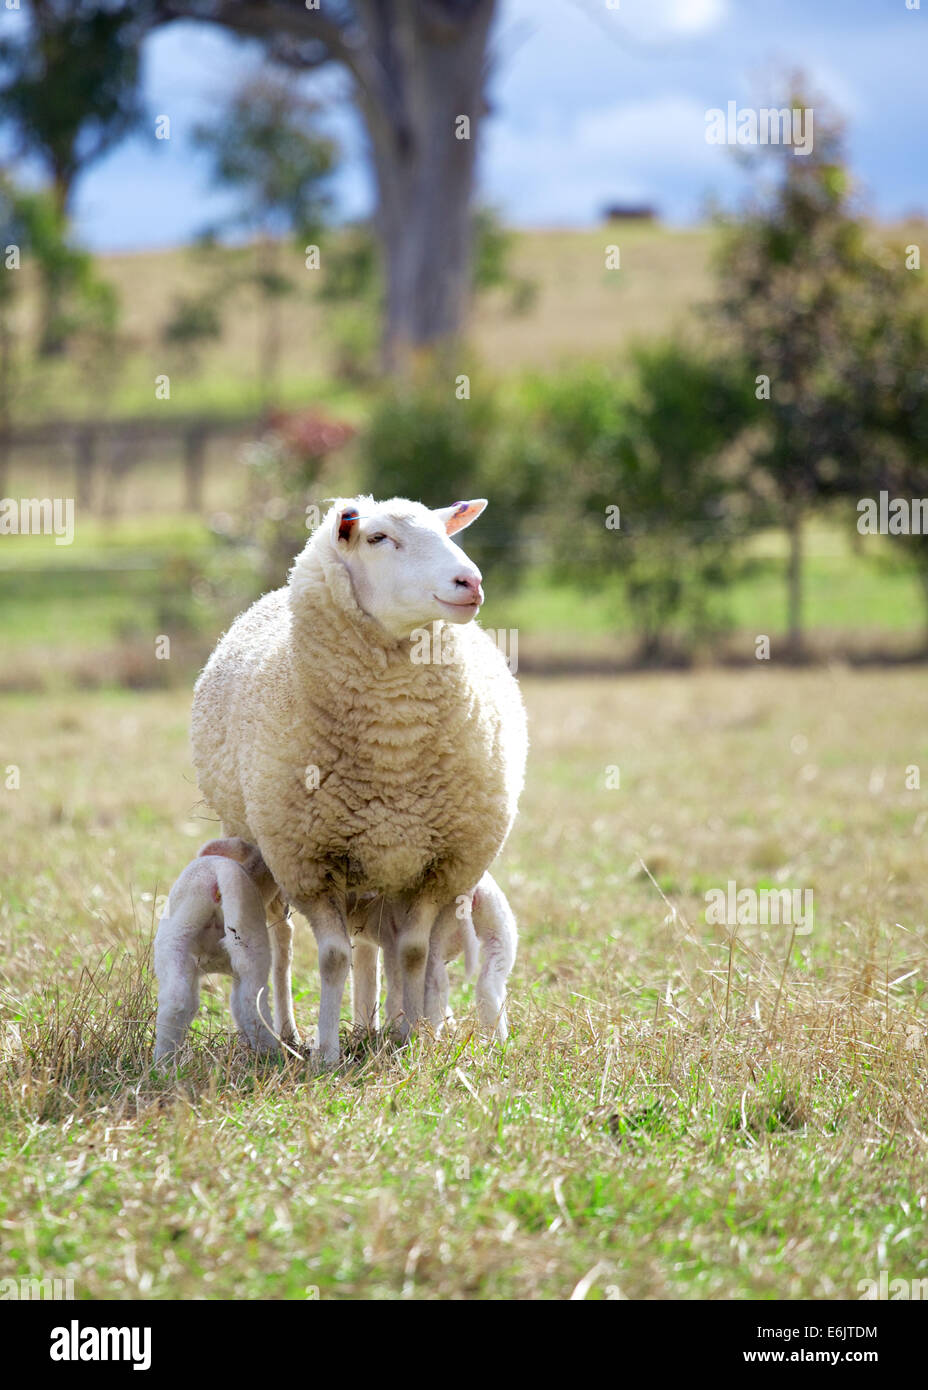 a suffolk sheep and two lambs Stock Photo